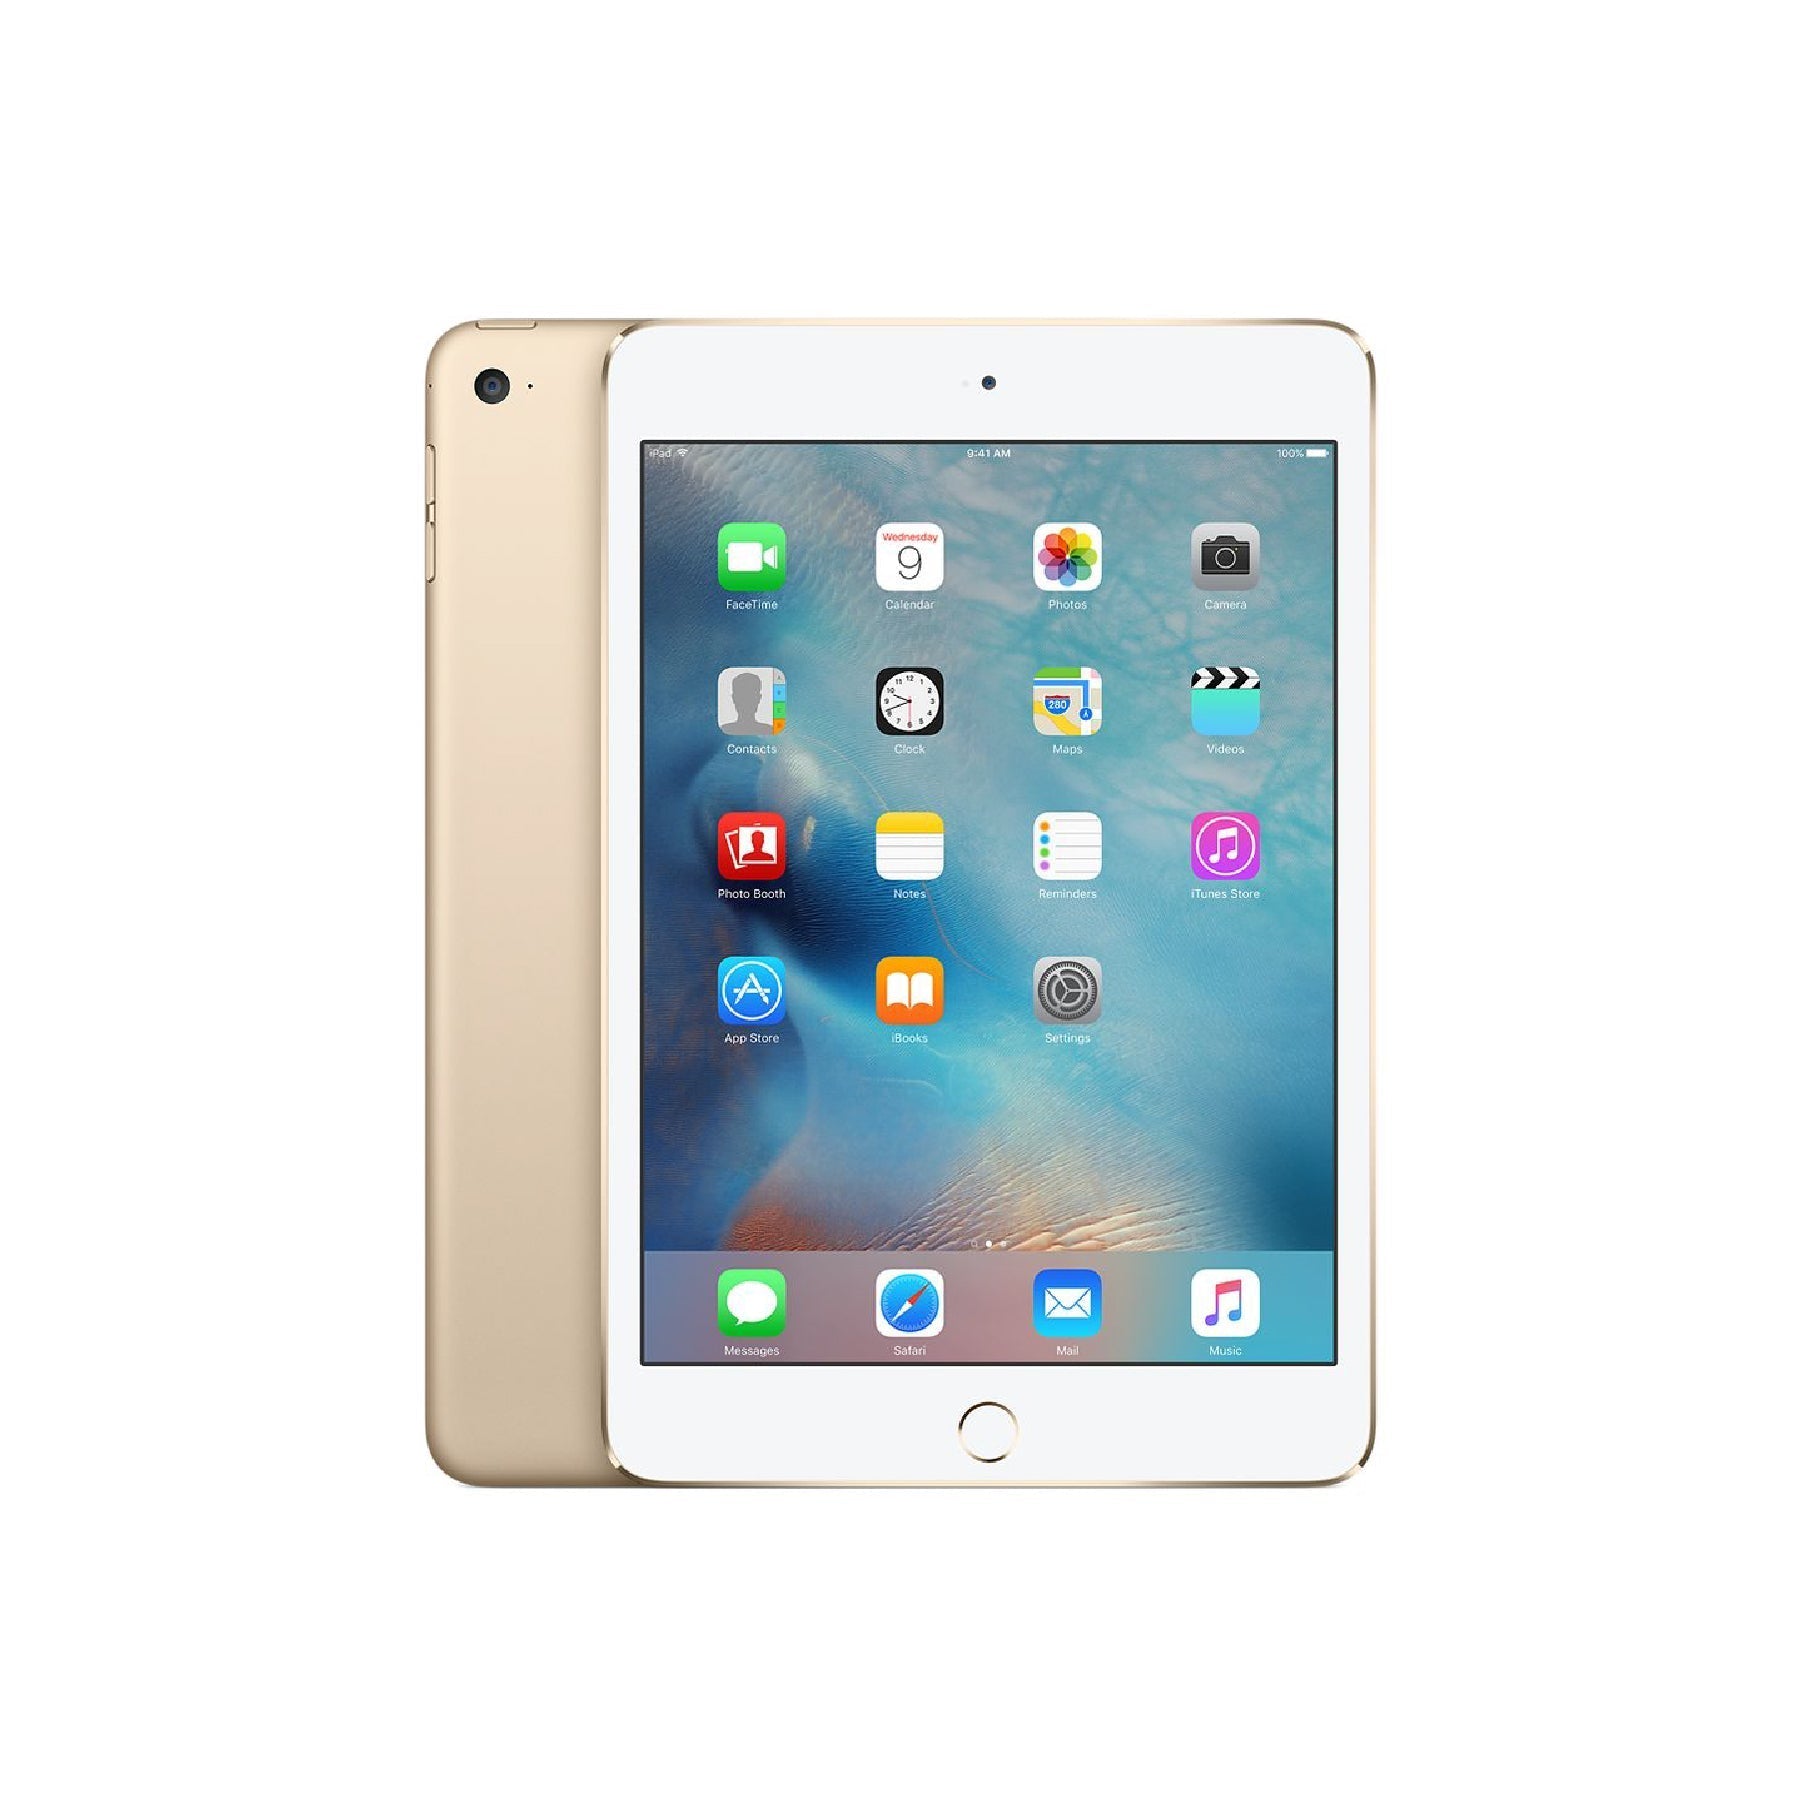 iPad mini (7.9-inch, Late 2015, 4th Generation) Wi-Fi + Cellular - iStore Pre-owned